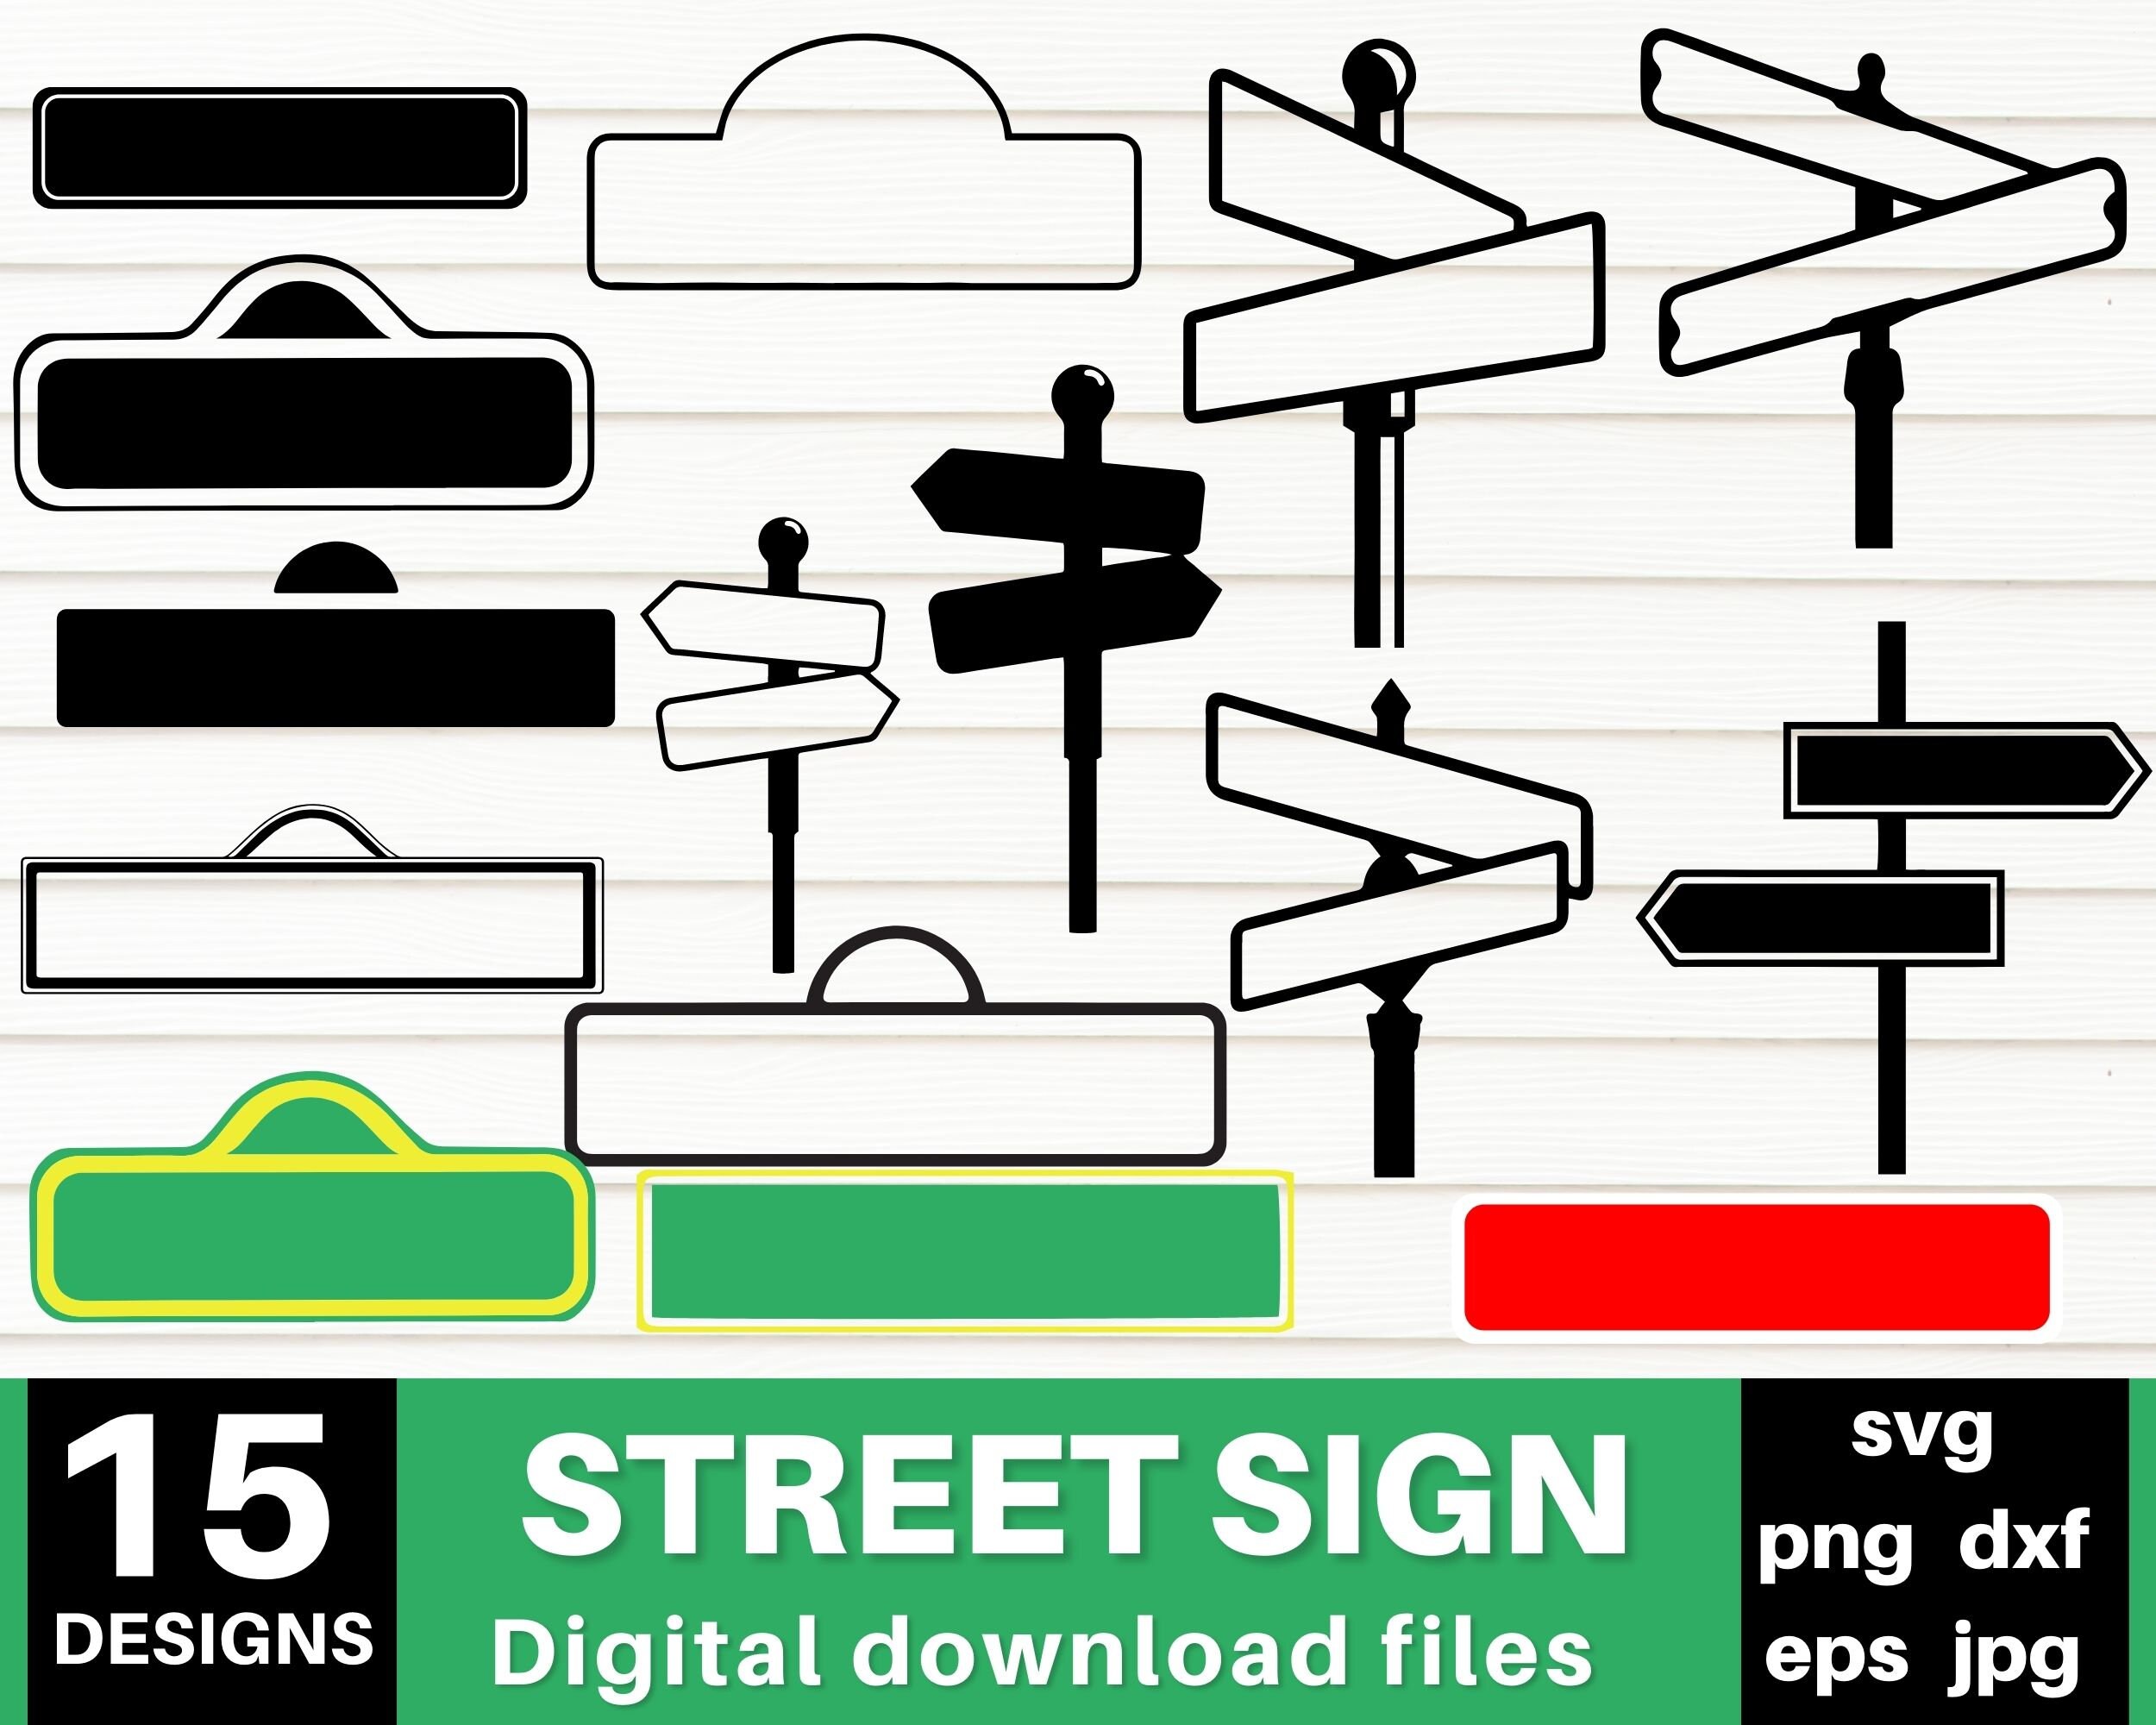 Witch Way Street Sign SVG Graphic by Atelier Design · Creative Fabrica